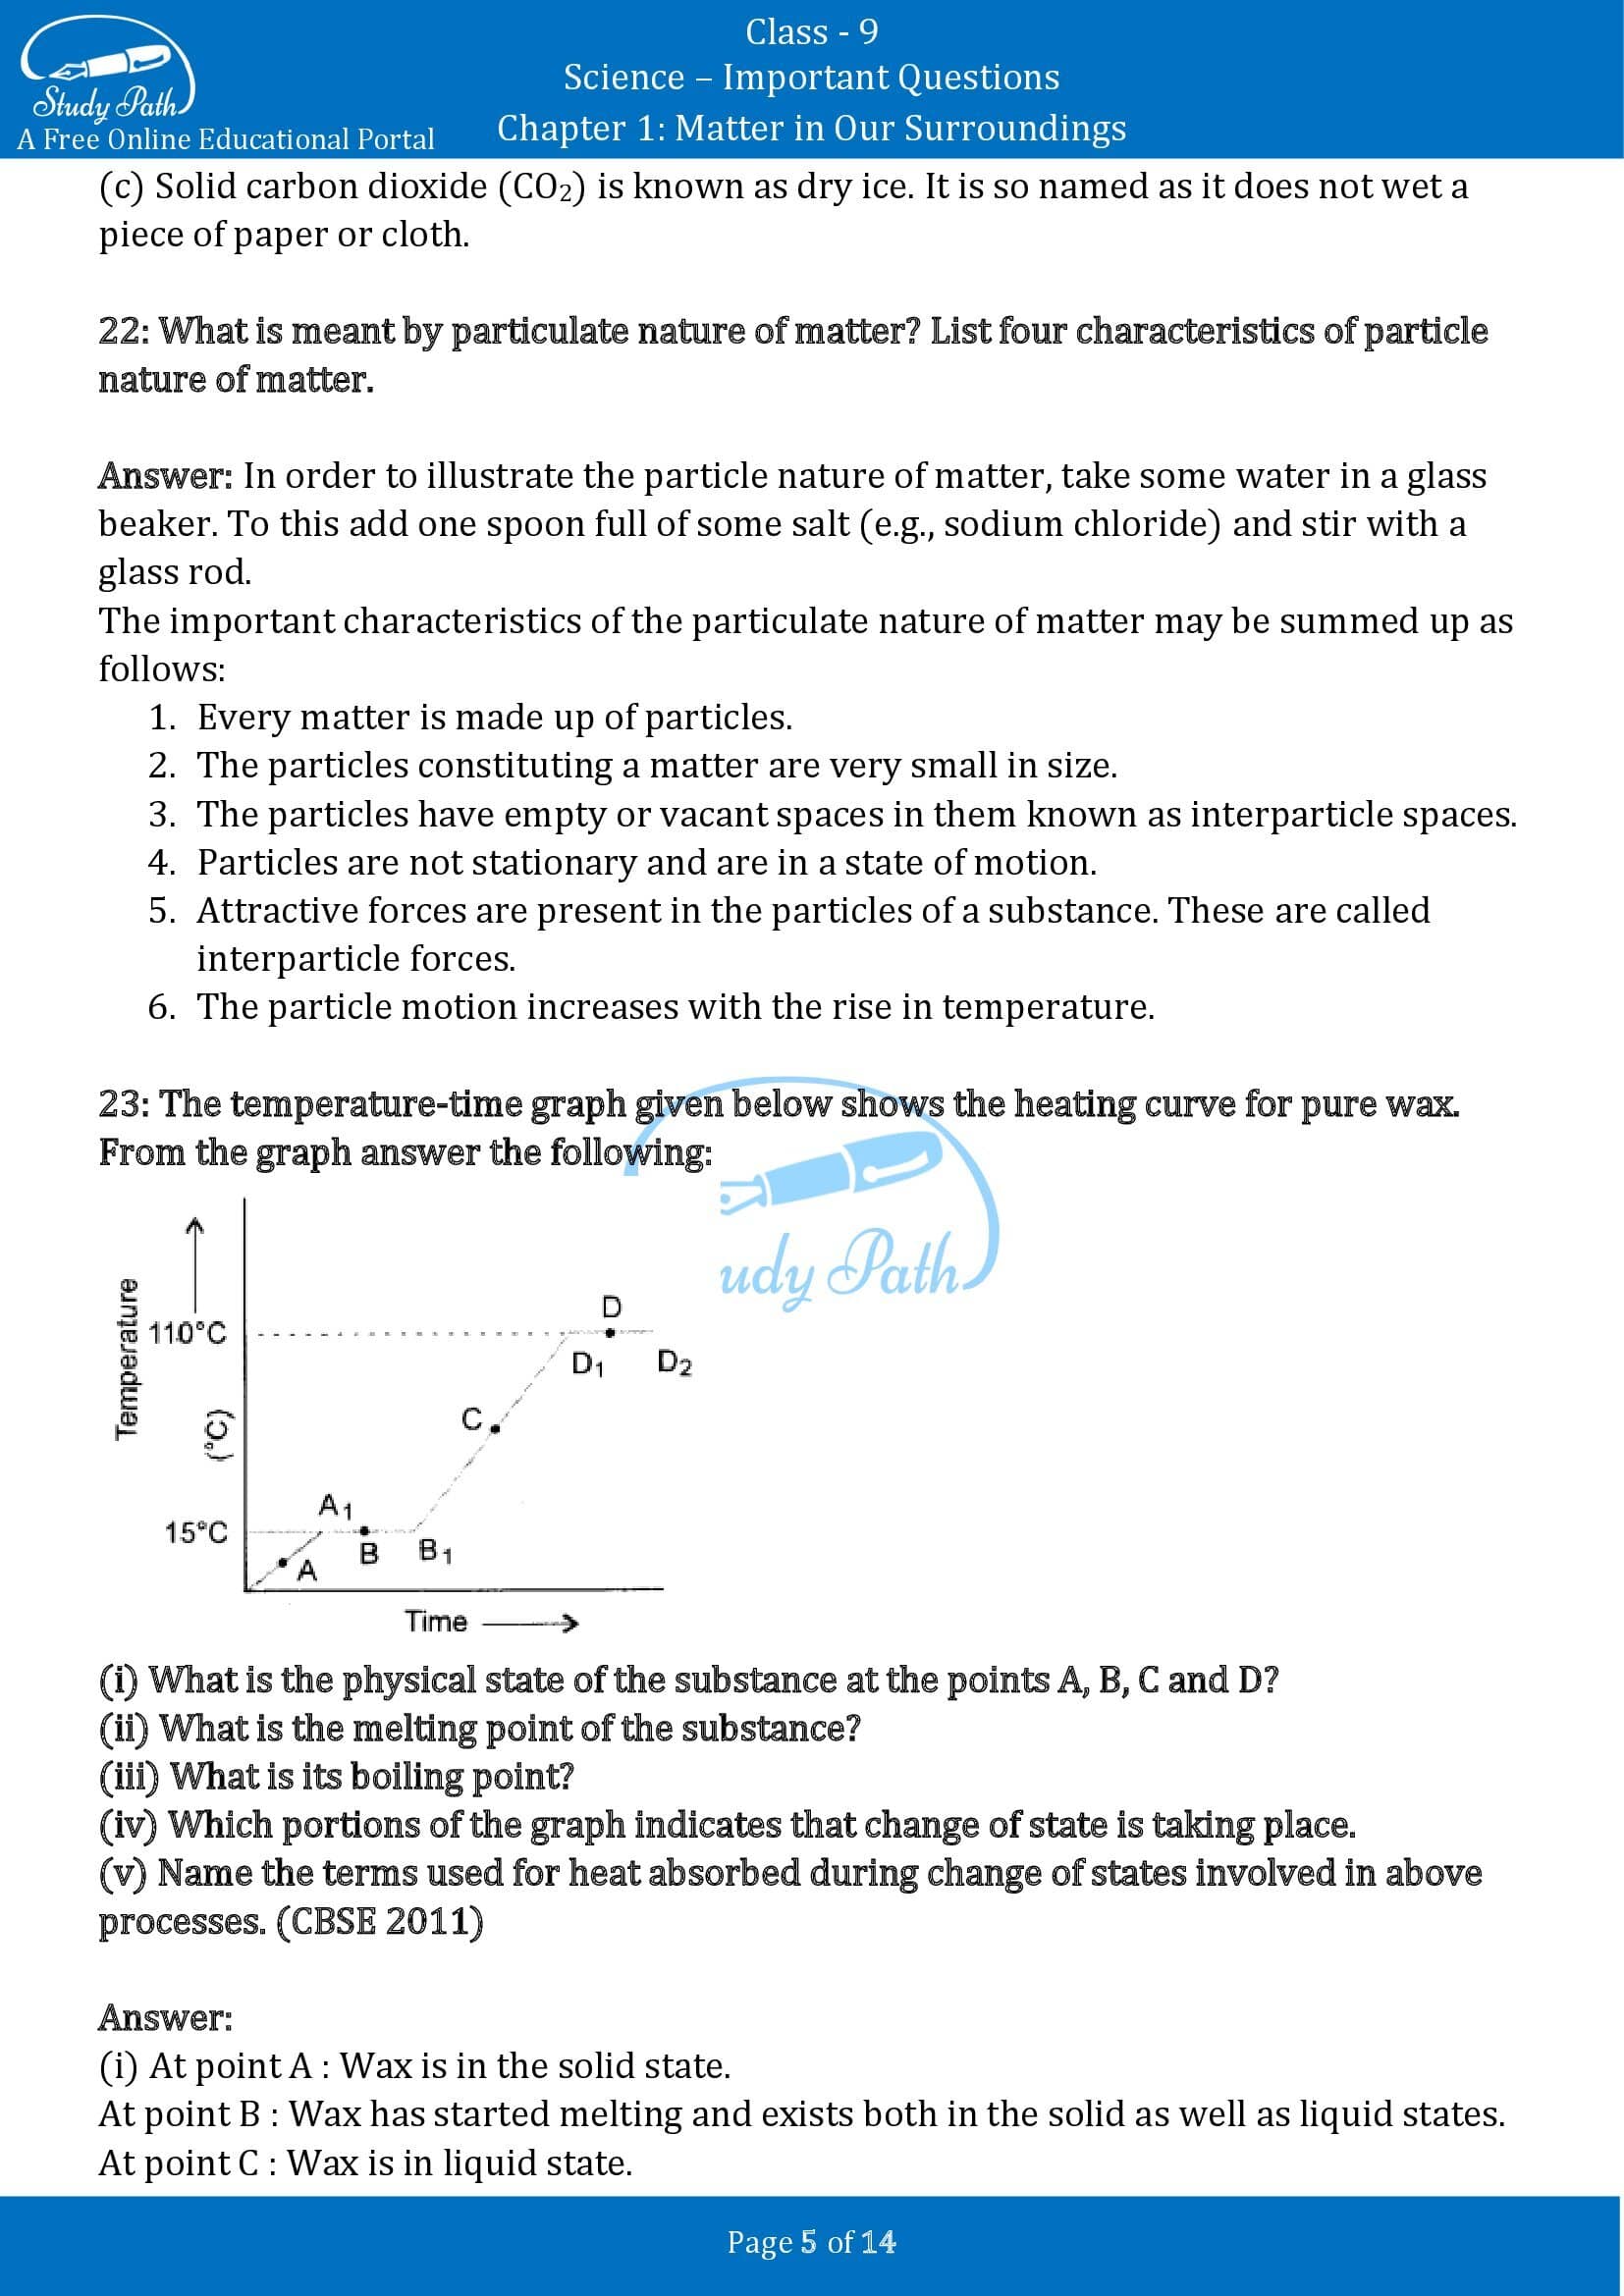 case study questions on matter in our surroundings class 9